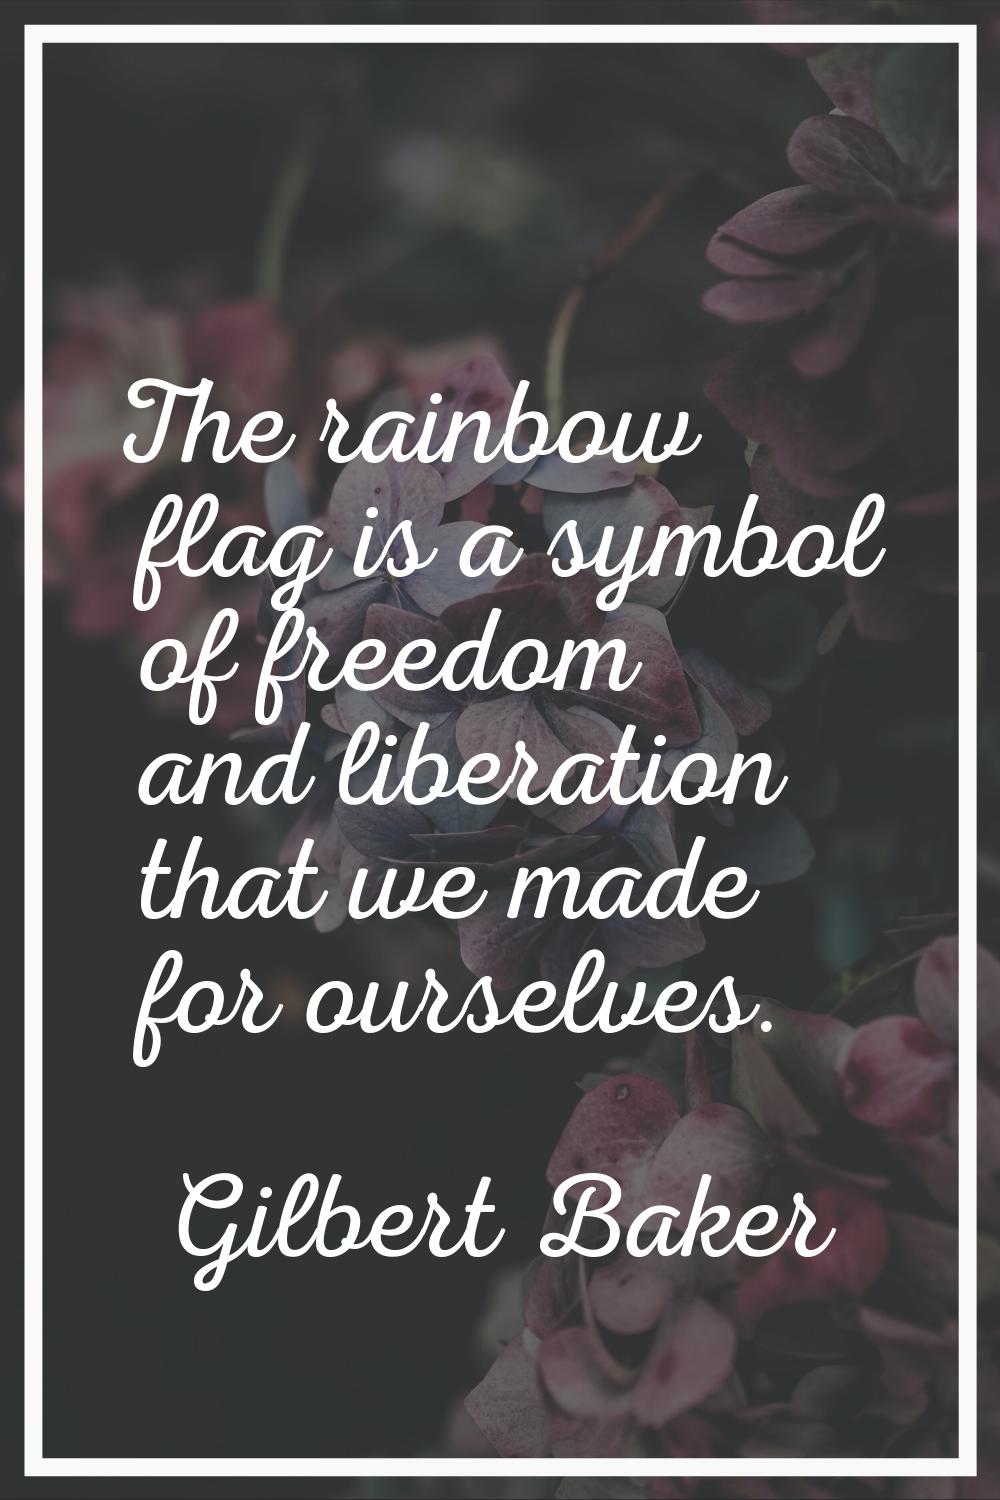 The rainbow flag is a symbol of freedom and liberation that we made for ourselves.